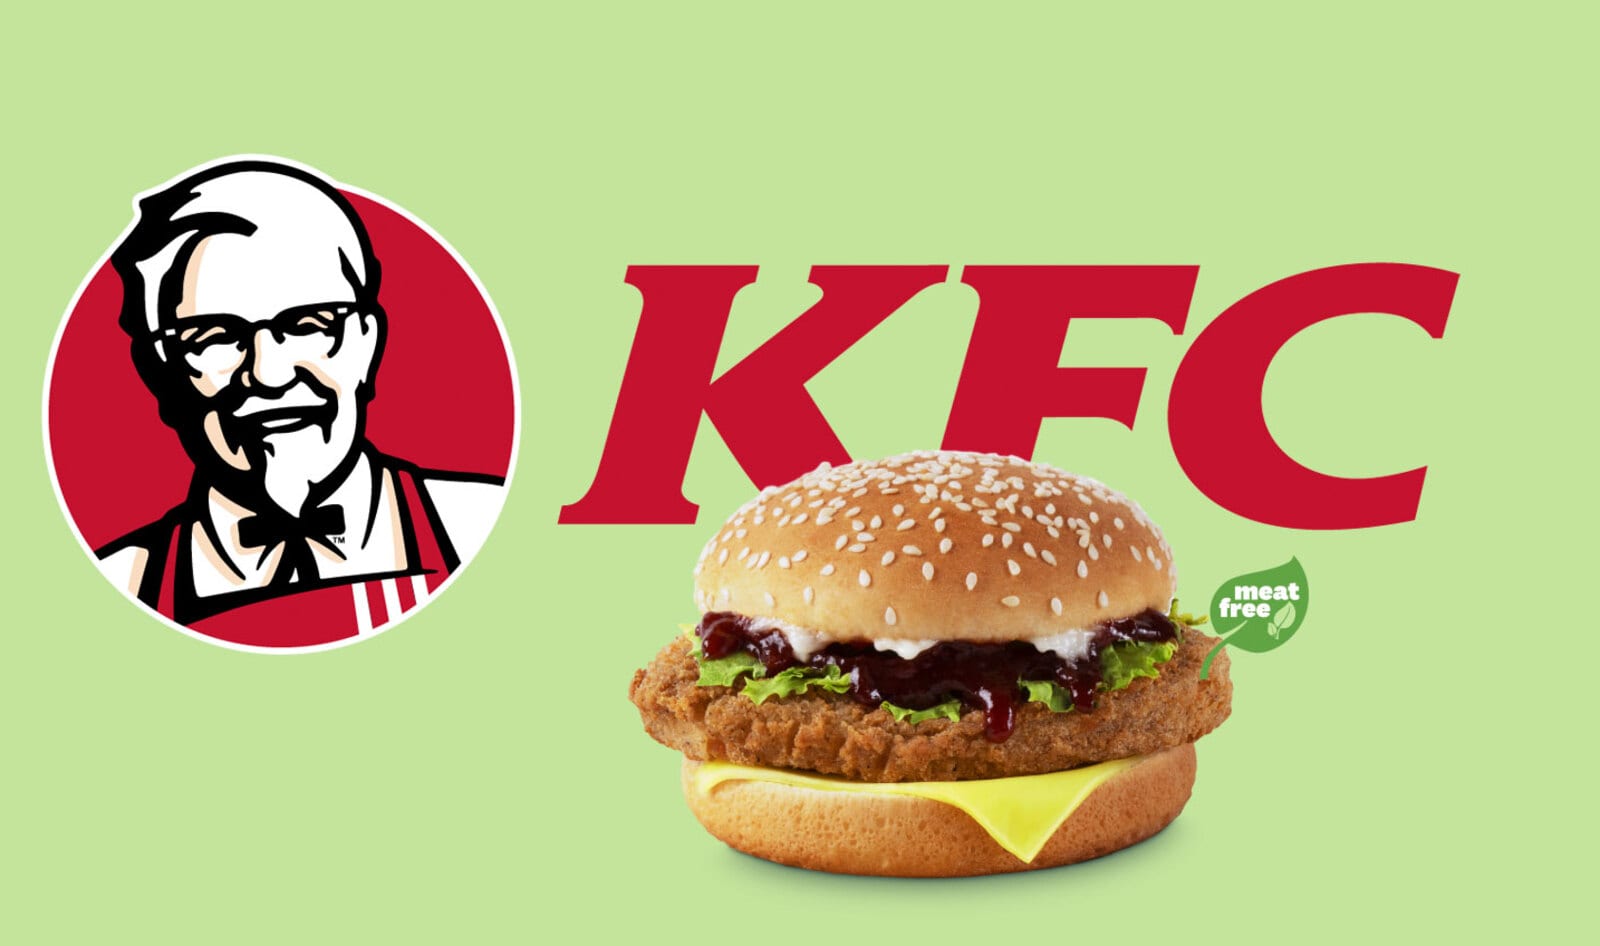 KFC’s Meatless Chicken Burger Launches at More than 80 Locations in Singapore